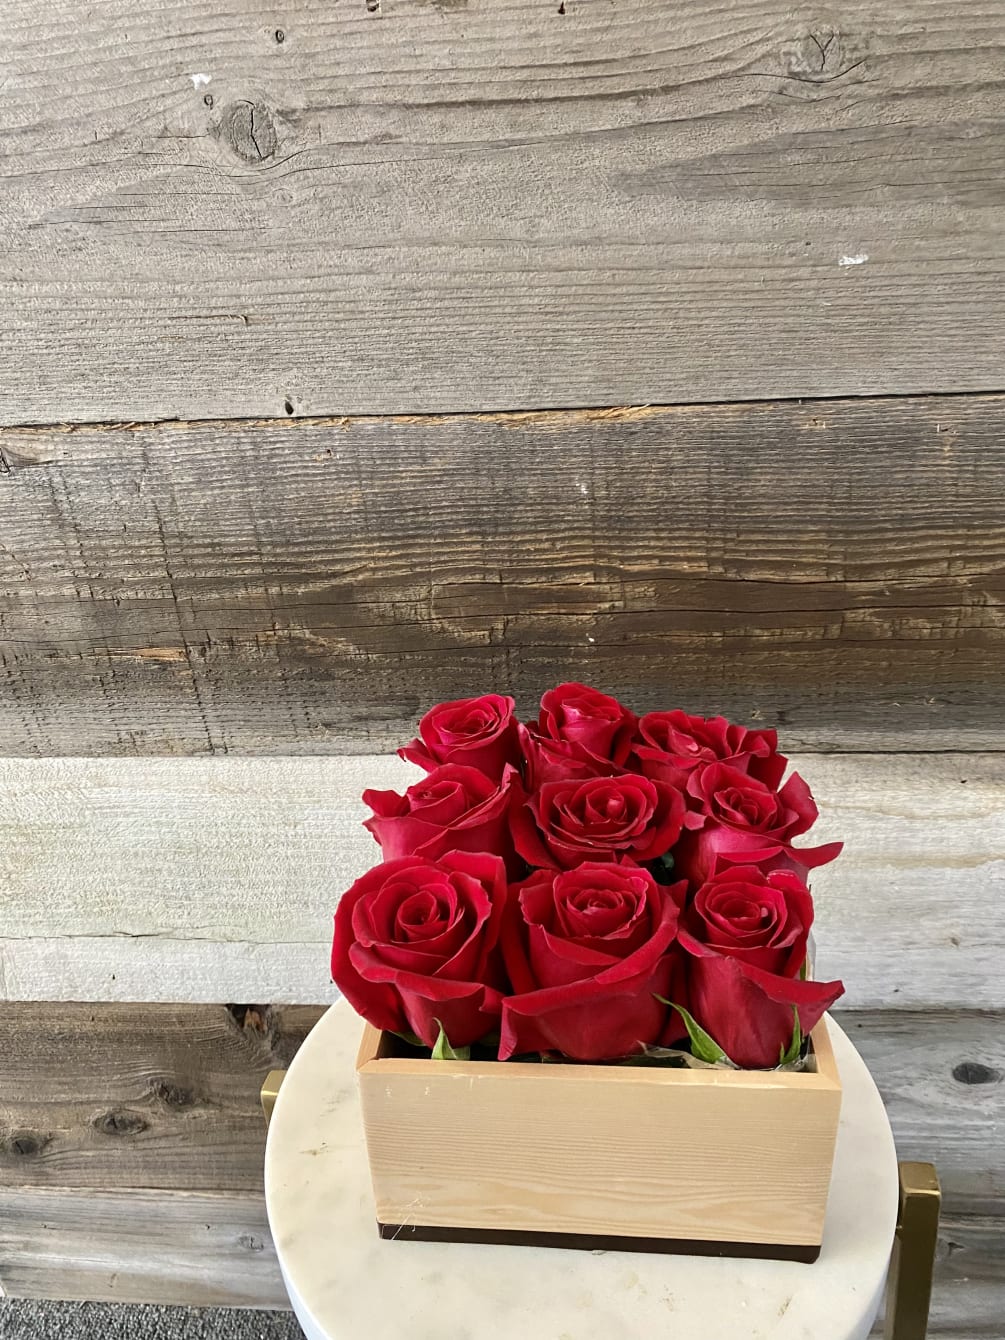 Say thank you with a 
Box of red roses 